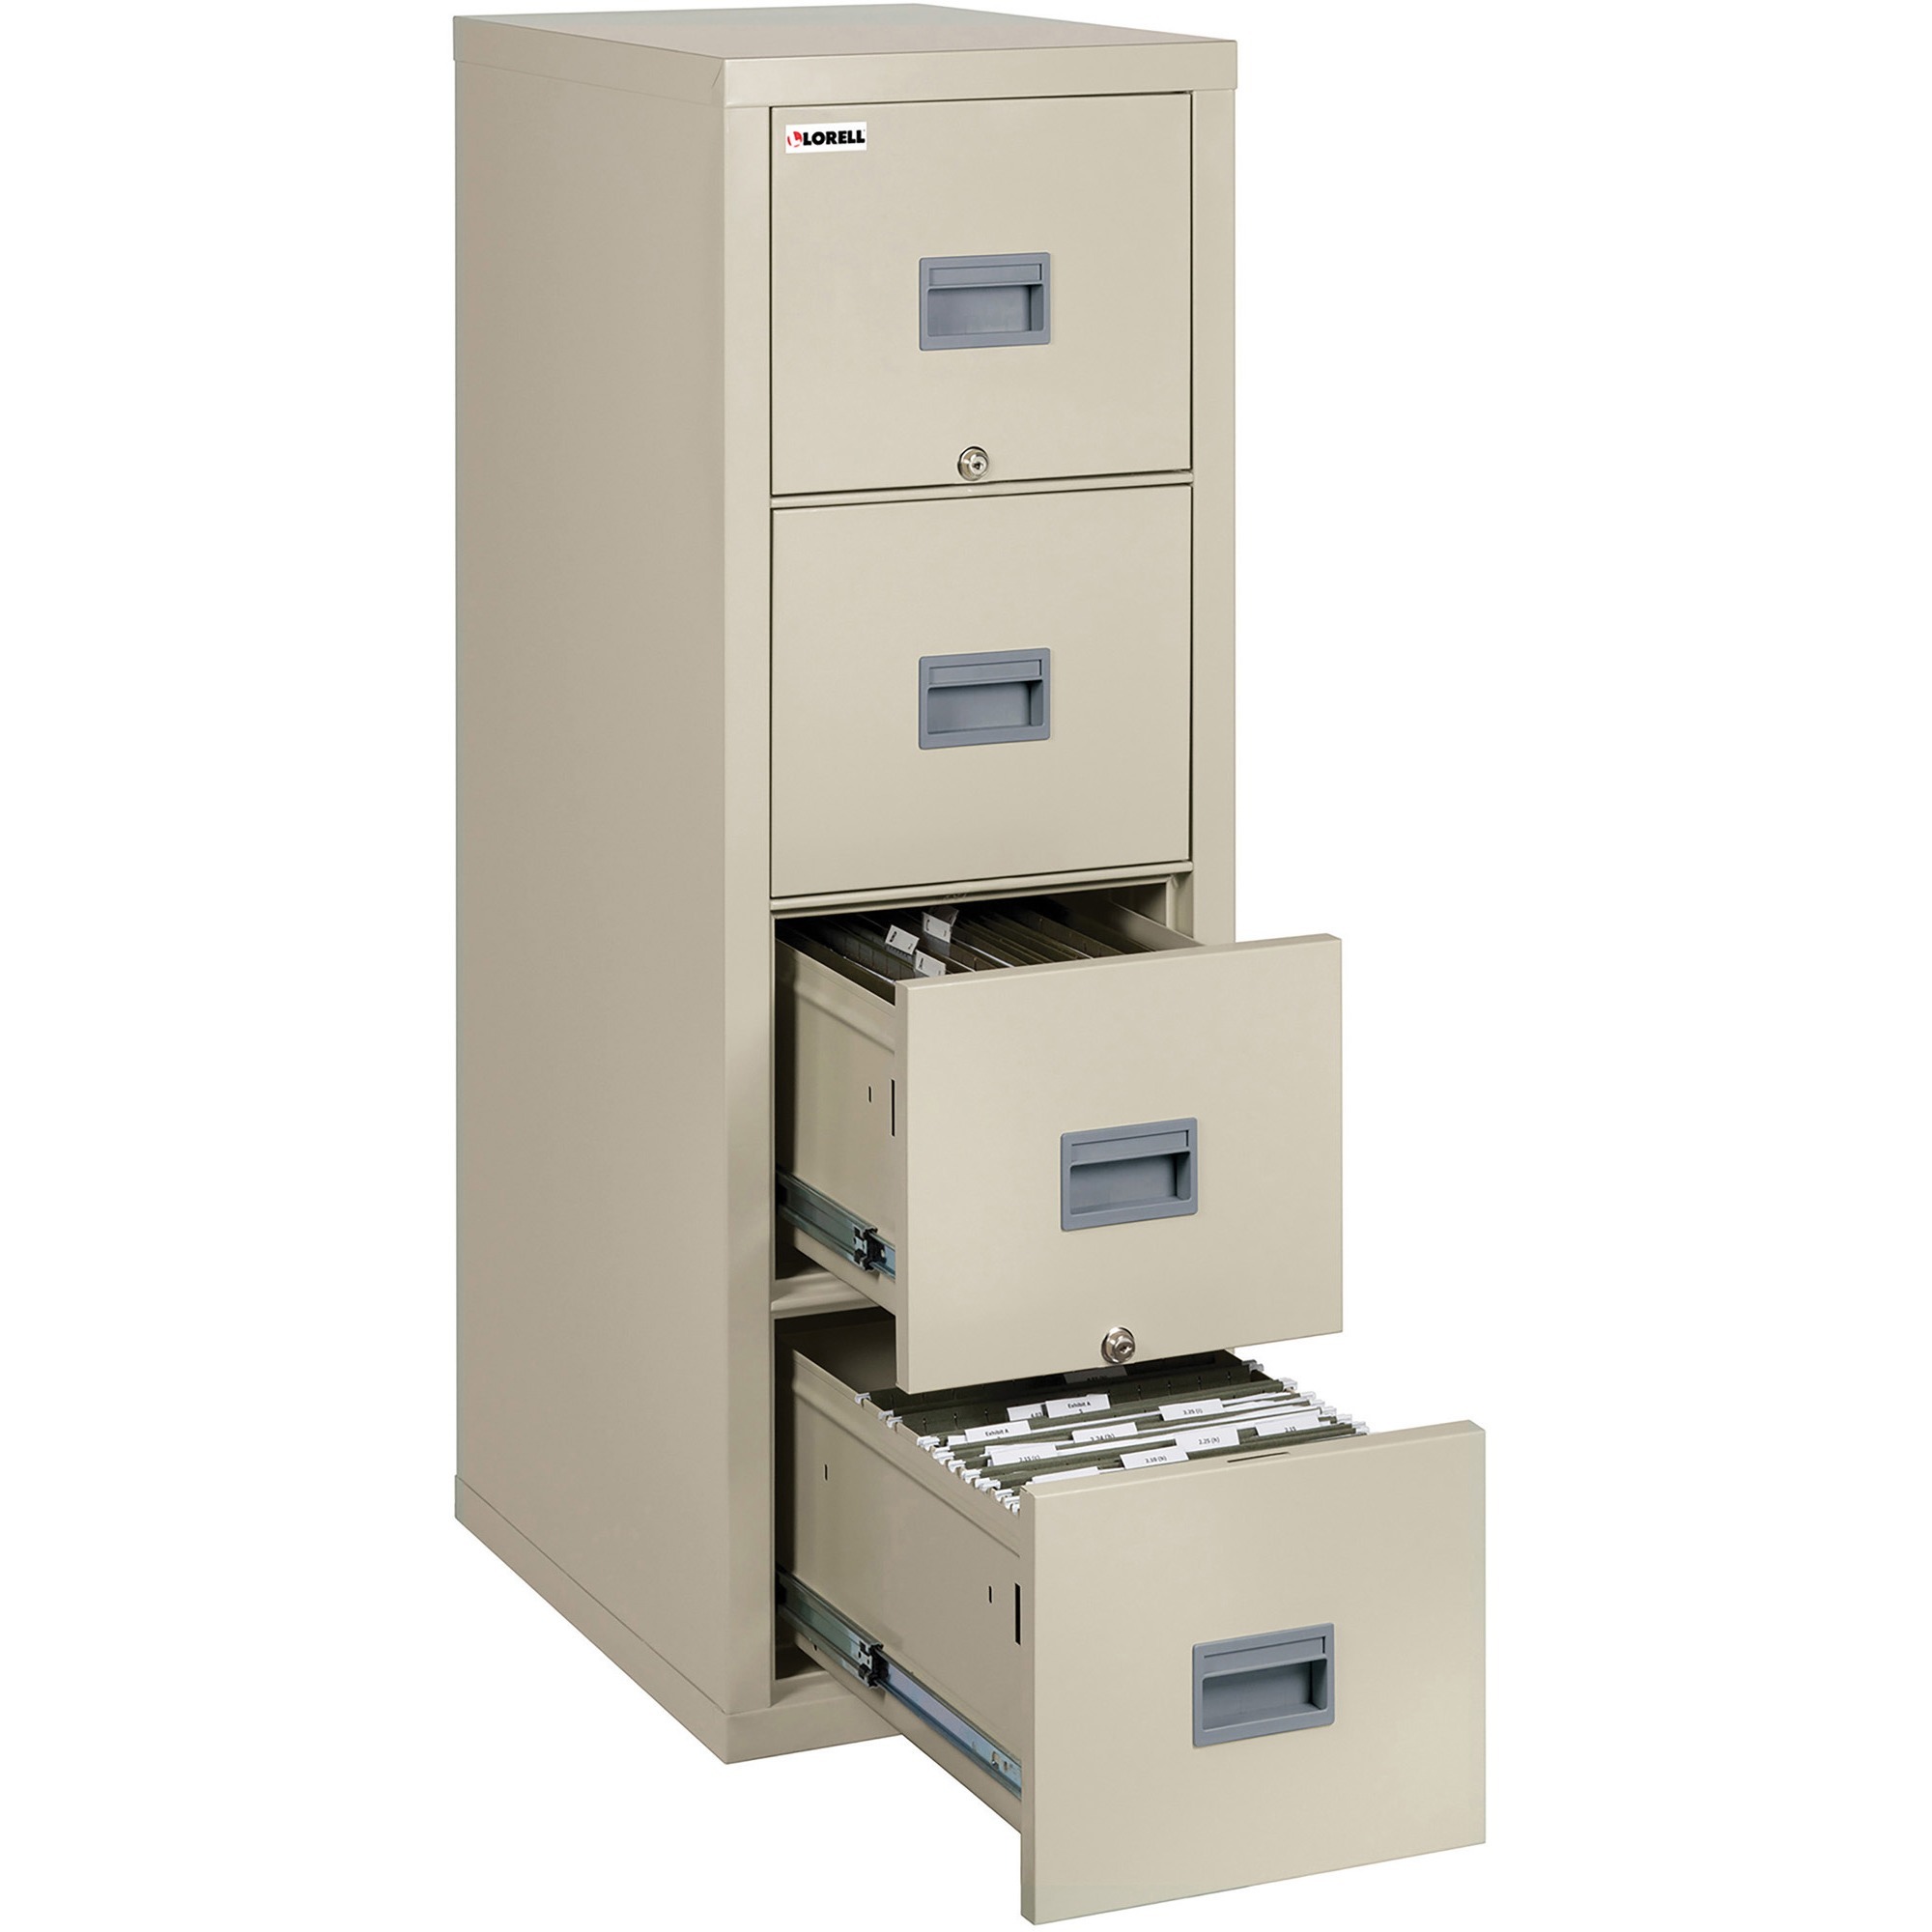 Llr L4p2131cpa Lorell White Vertical Fireproof File Cabinet 4 Drawer Lorell Furniture